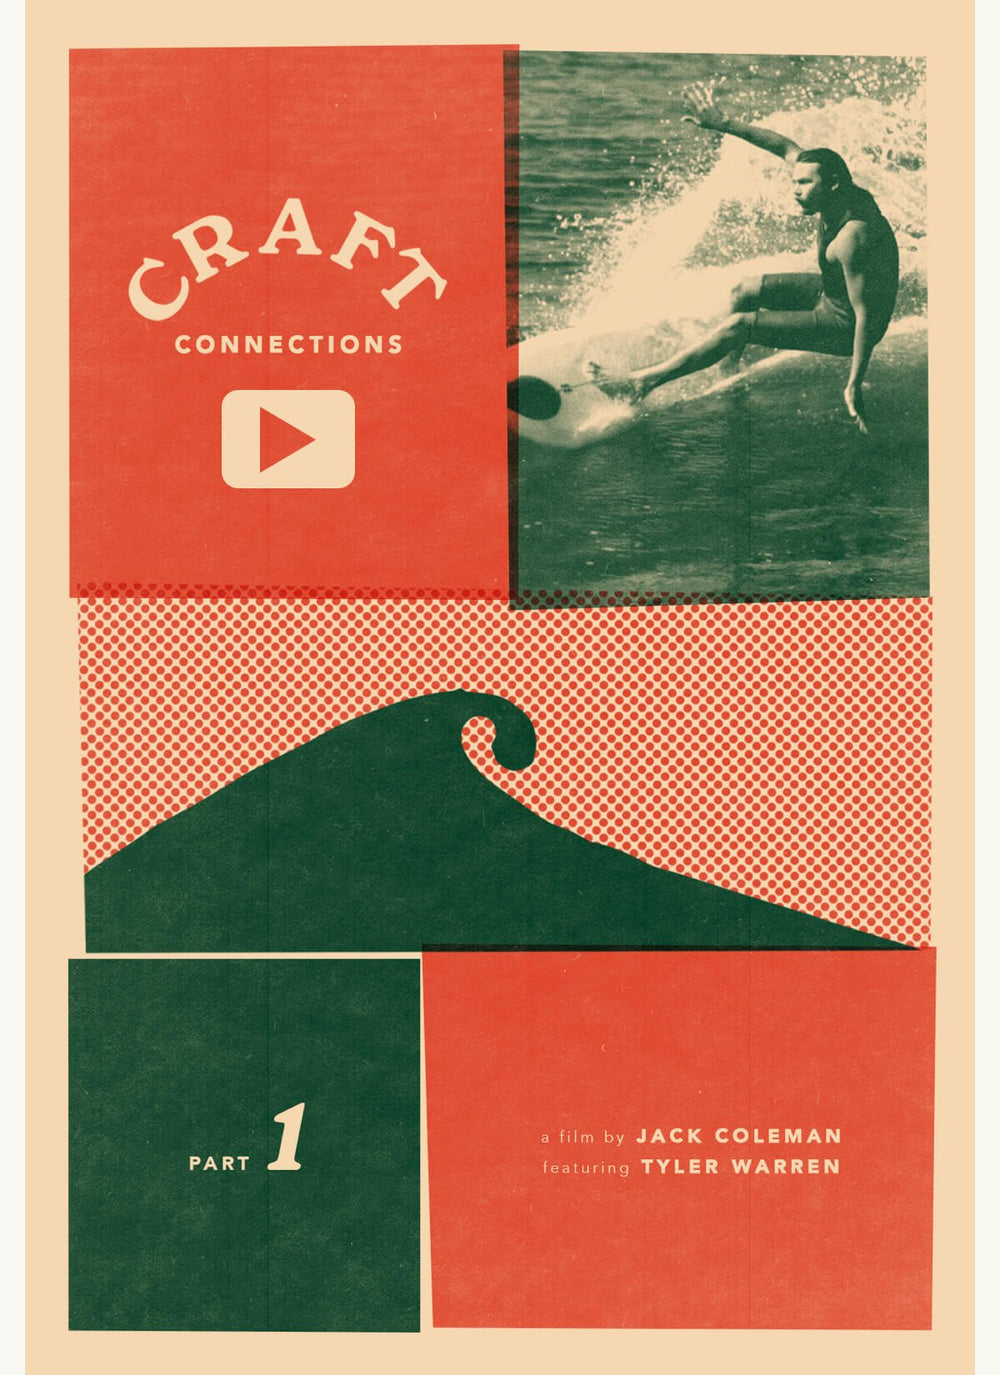 Craft Connections Pt. 1 - a film by Jack Coleman